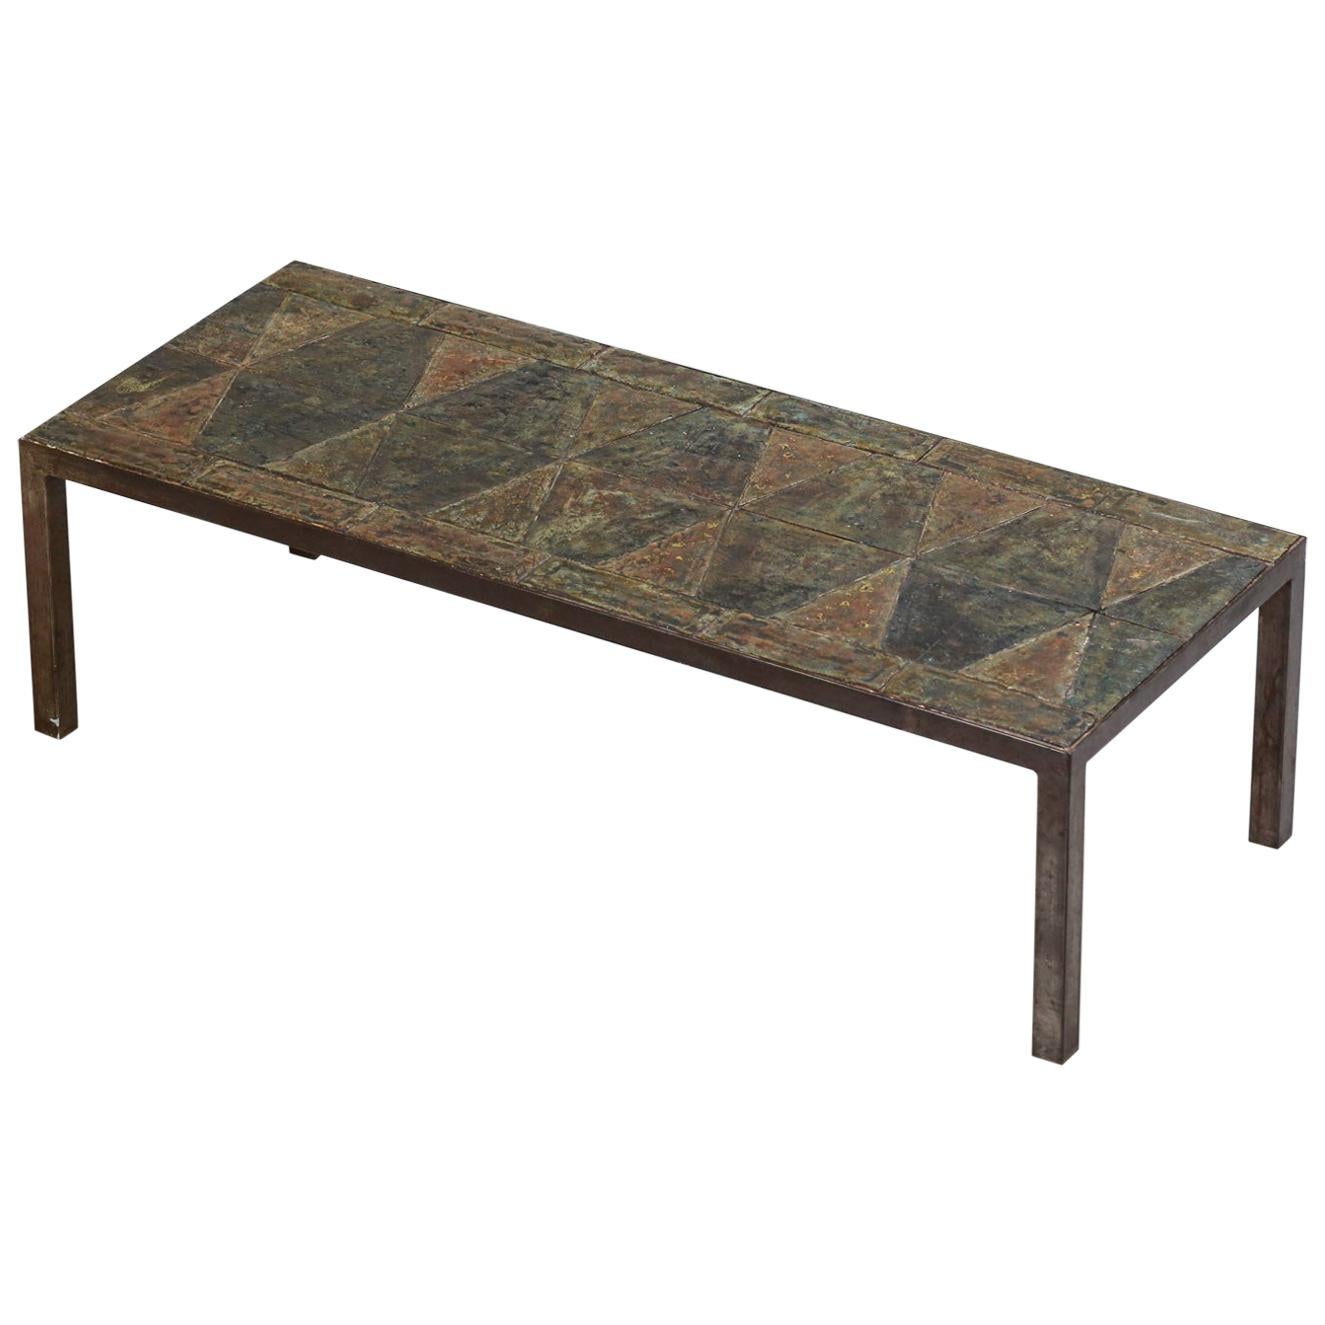 Brutalist Coffee Table from the 1960s Made of Enameled Lava Stones French Design